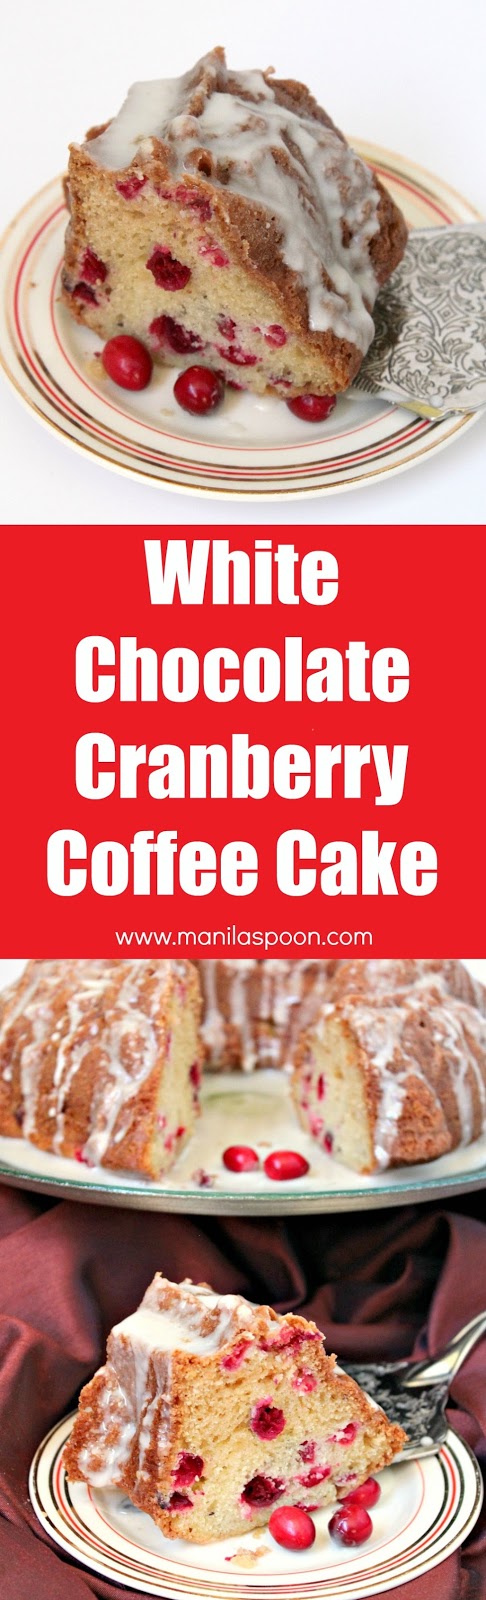 Use fresh, frozen or dried cranberries to make this moist and delicious White Chocolate Cranberry Coffee Cake. Perfect to serve for tea time as well. | manilaspoon.com